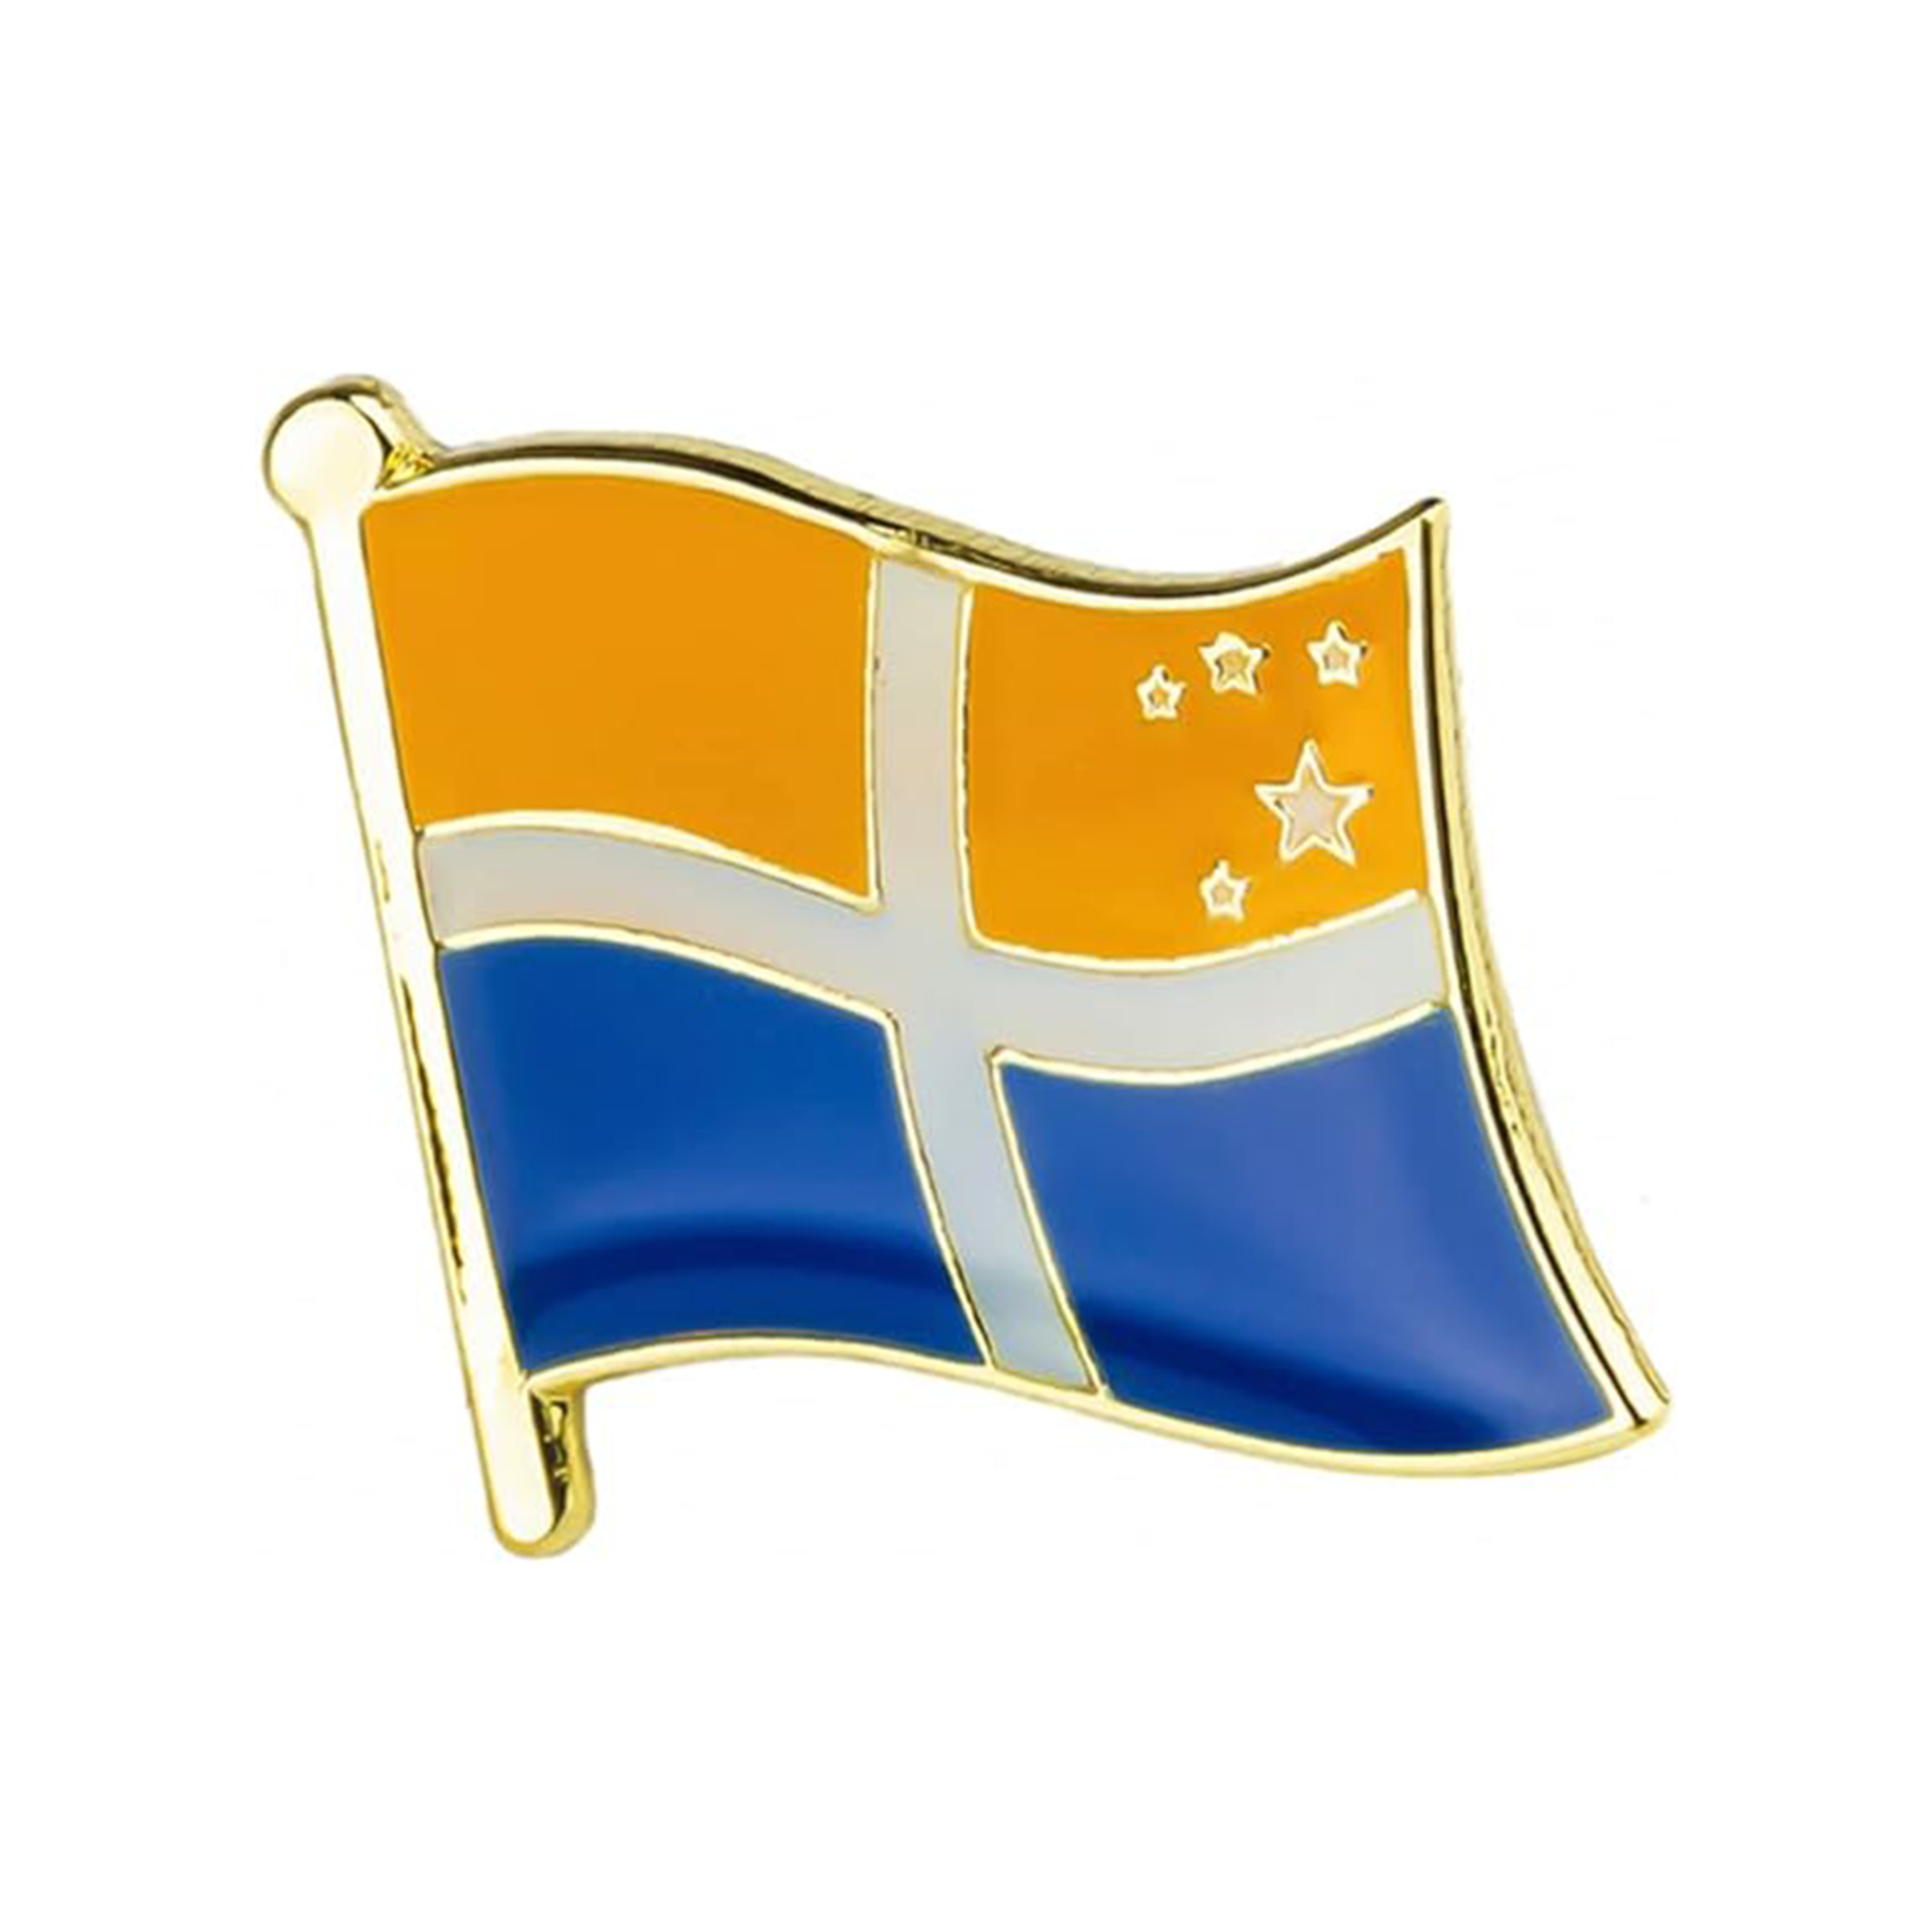 Isles Of Scilly Regional English County Flag Pin Badge